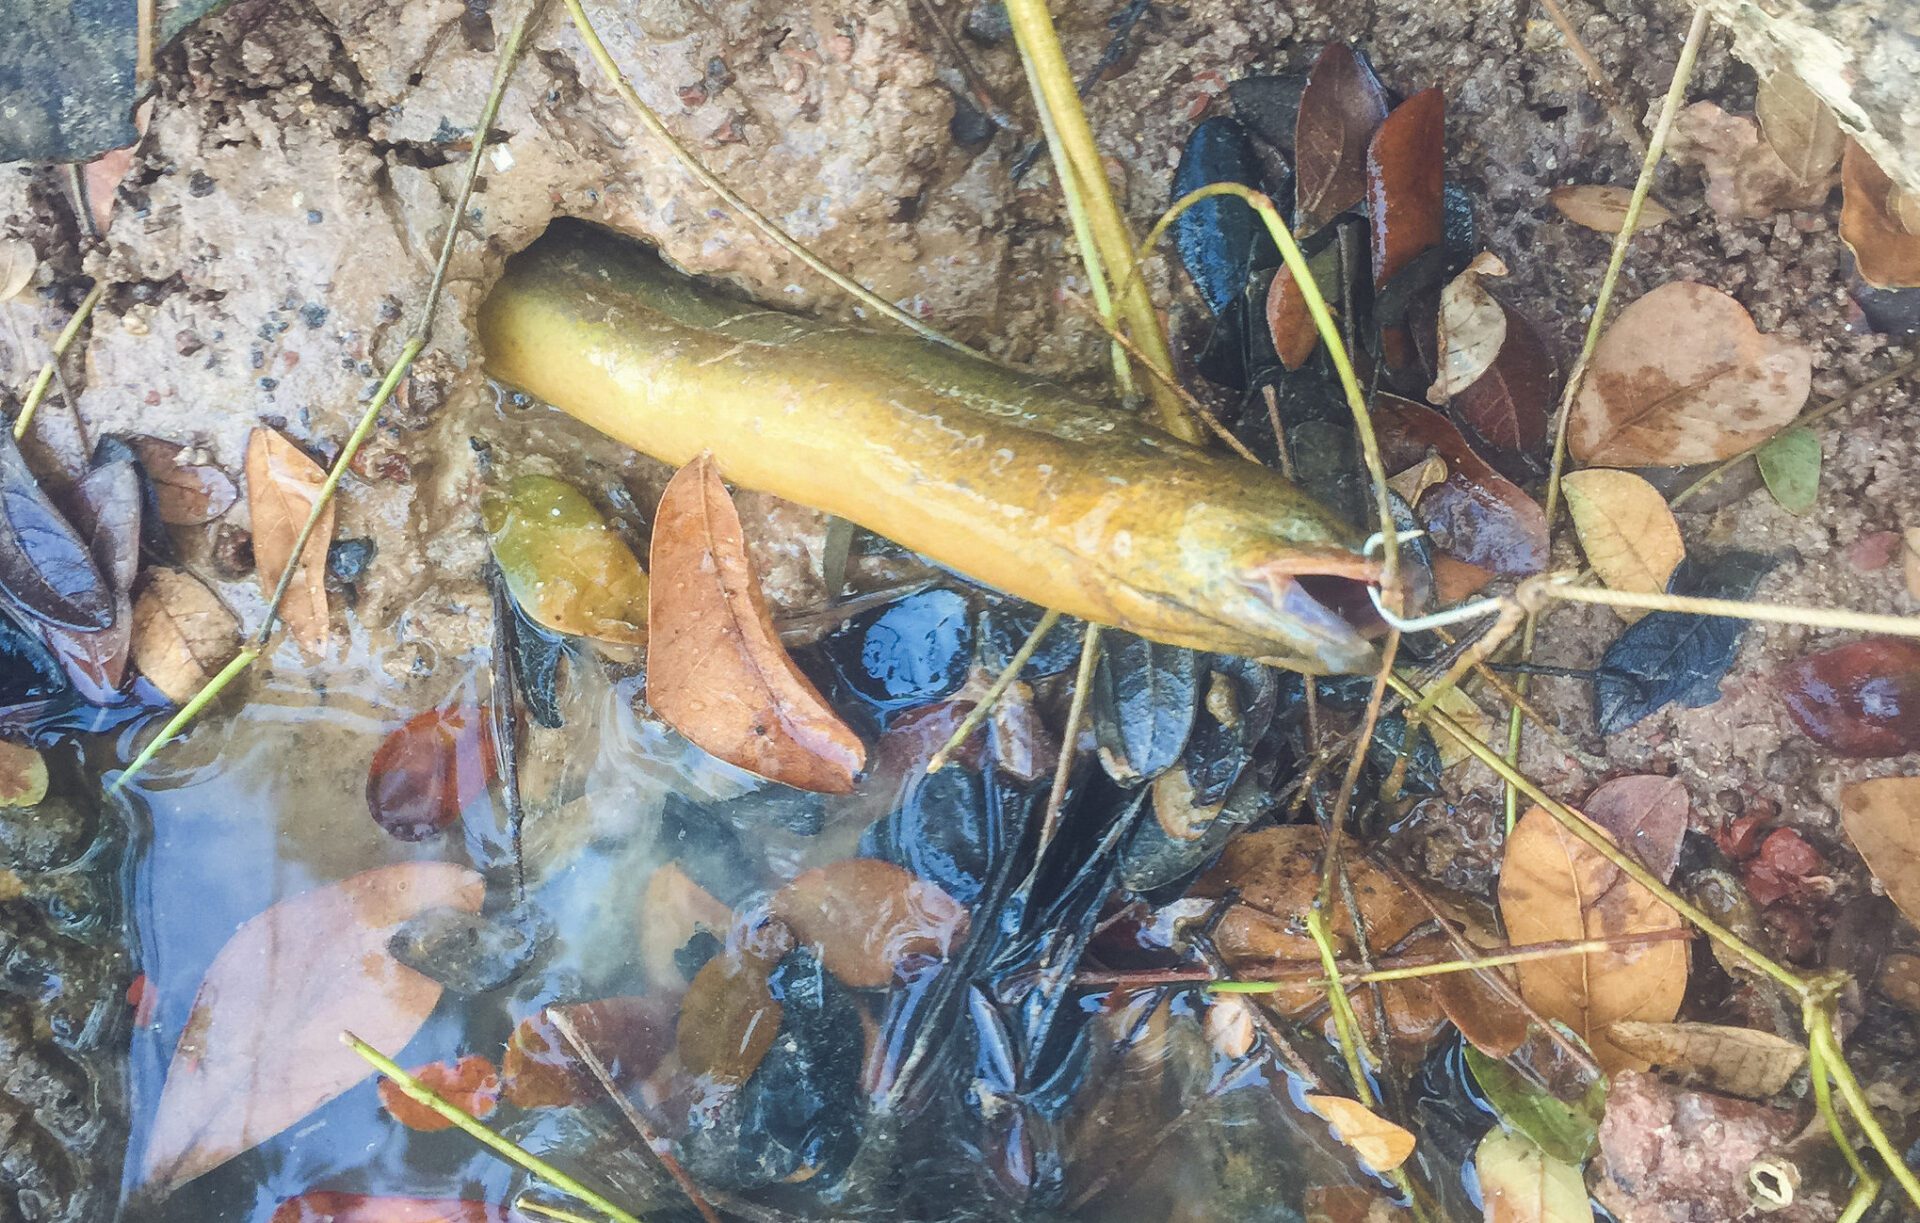 Catching an eel in a hole